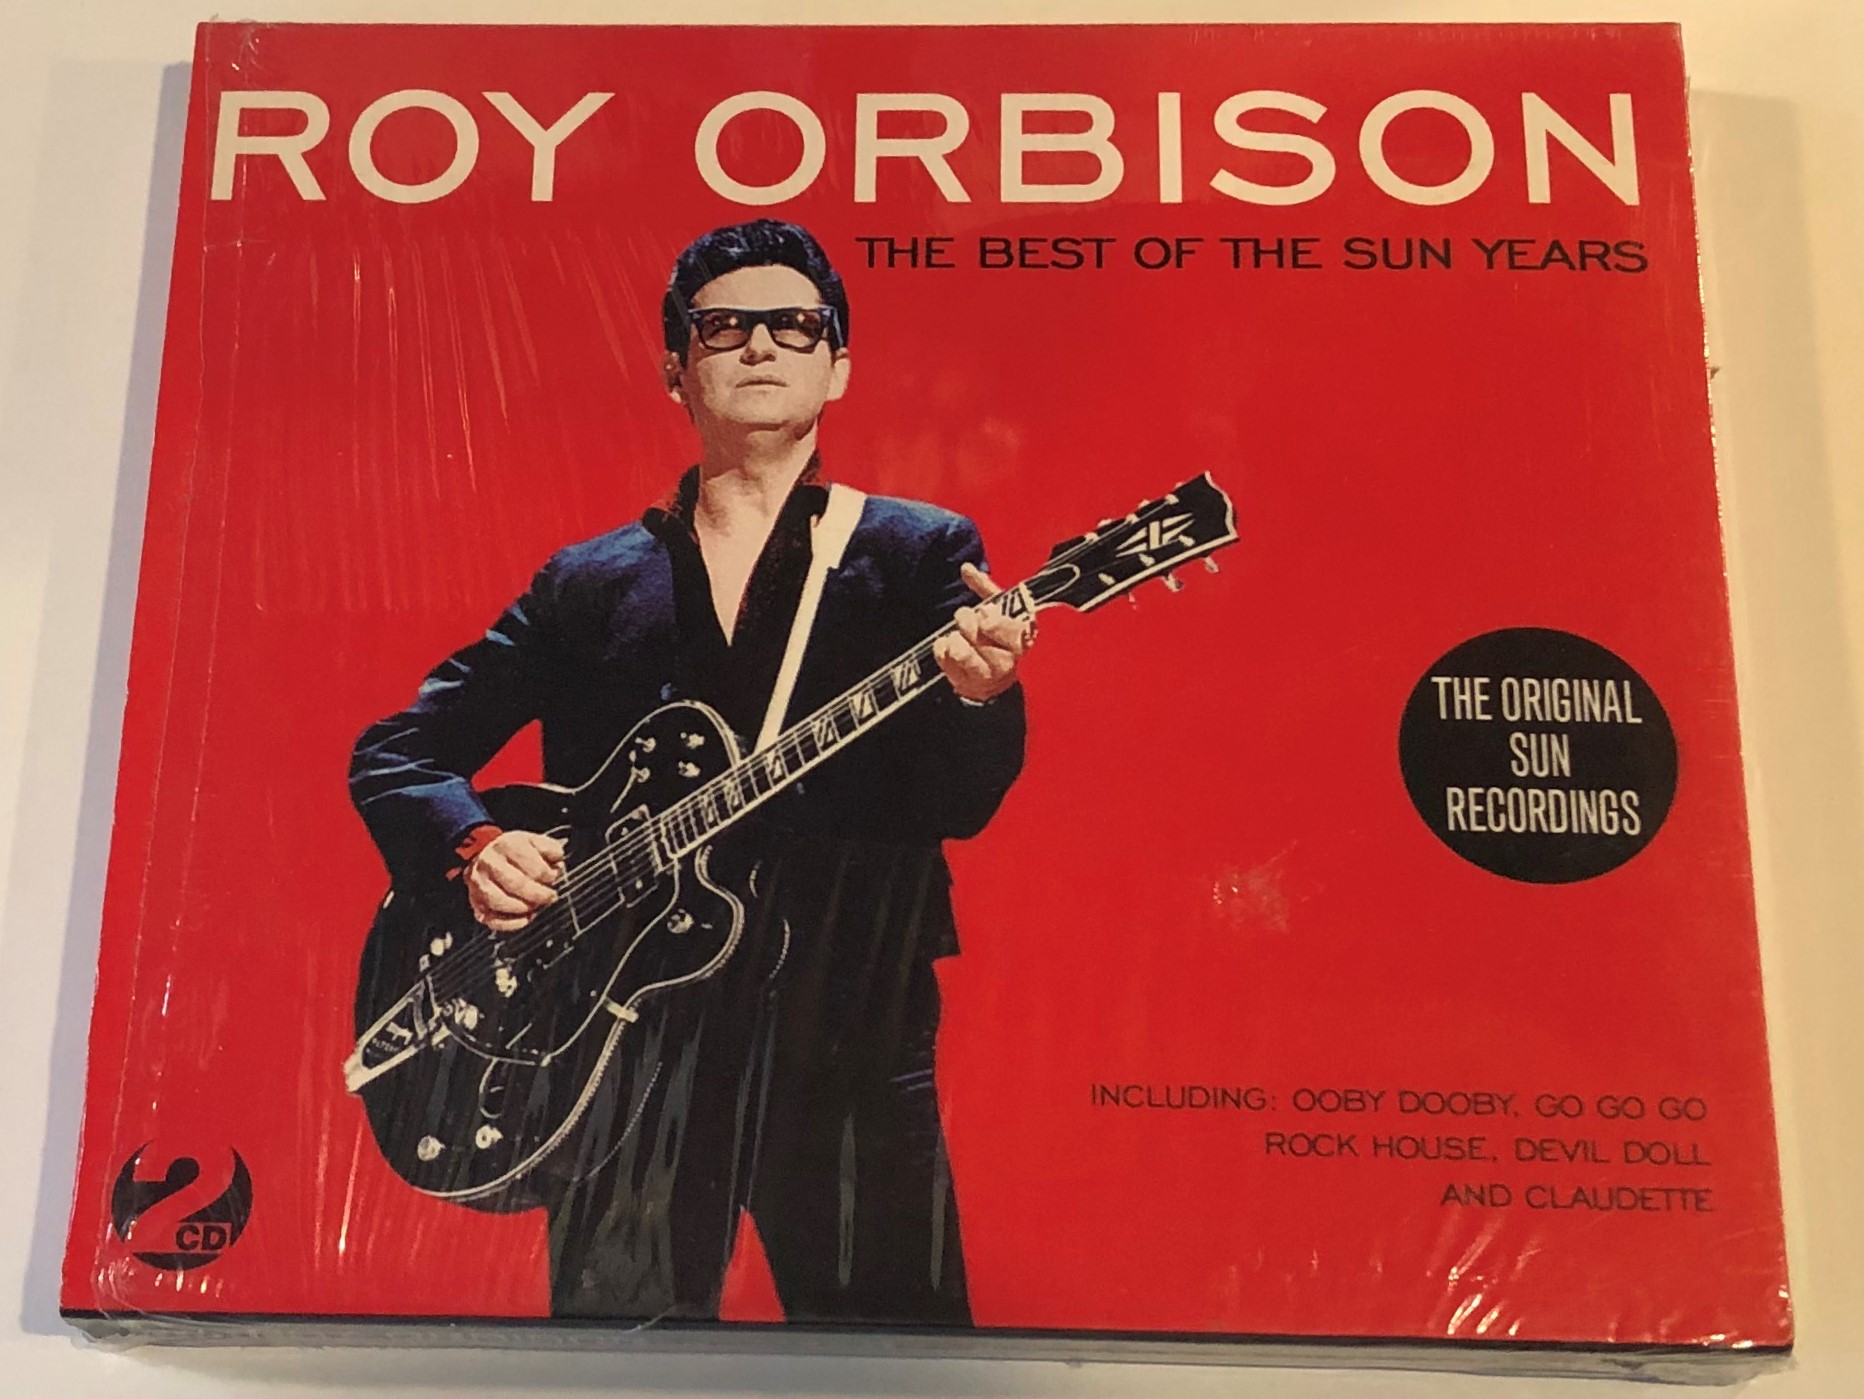 roy-orbison-the-best-of-the-sun-years-the-original-sun-recordings-including-ooby-dooby-go-go-go-rock-house-devil-doll-and-claudette-not-now-music-2x-audio-cd-2008-not2cd255-1-.jpg